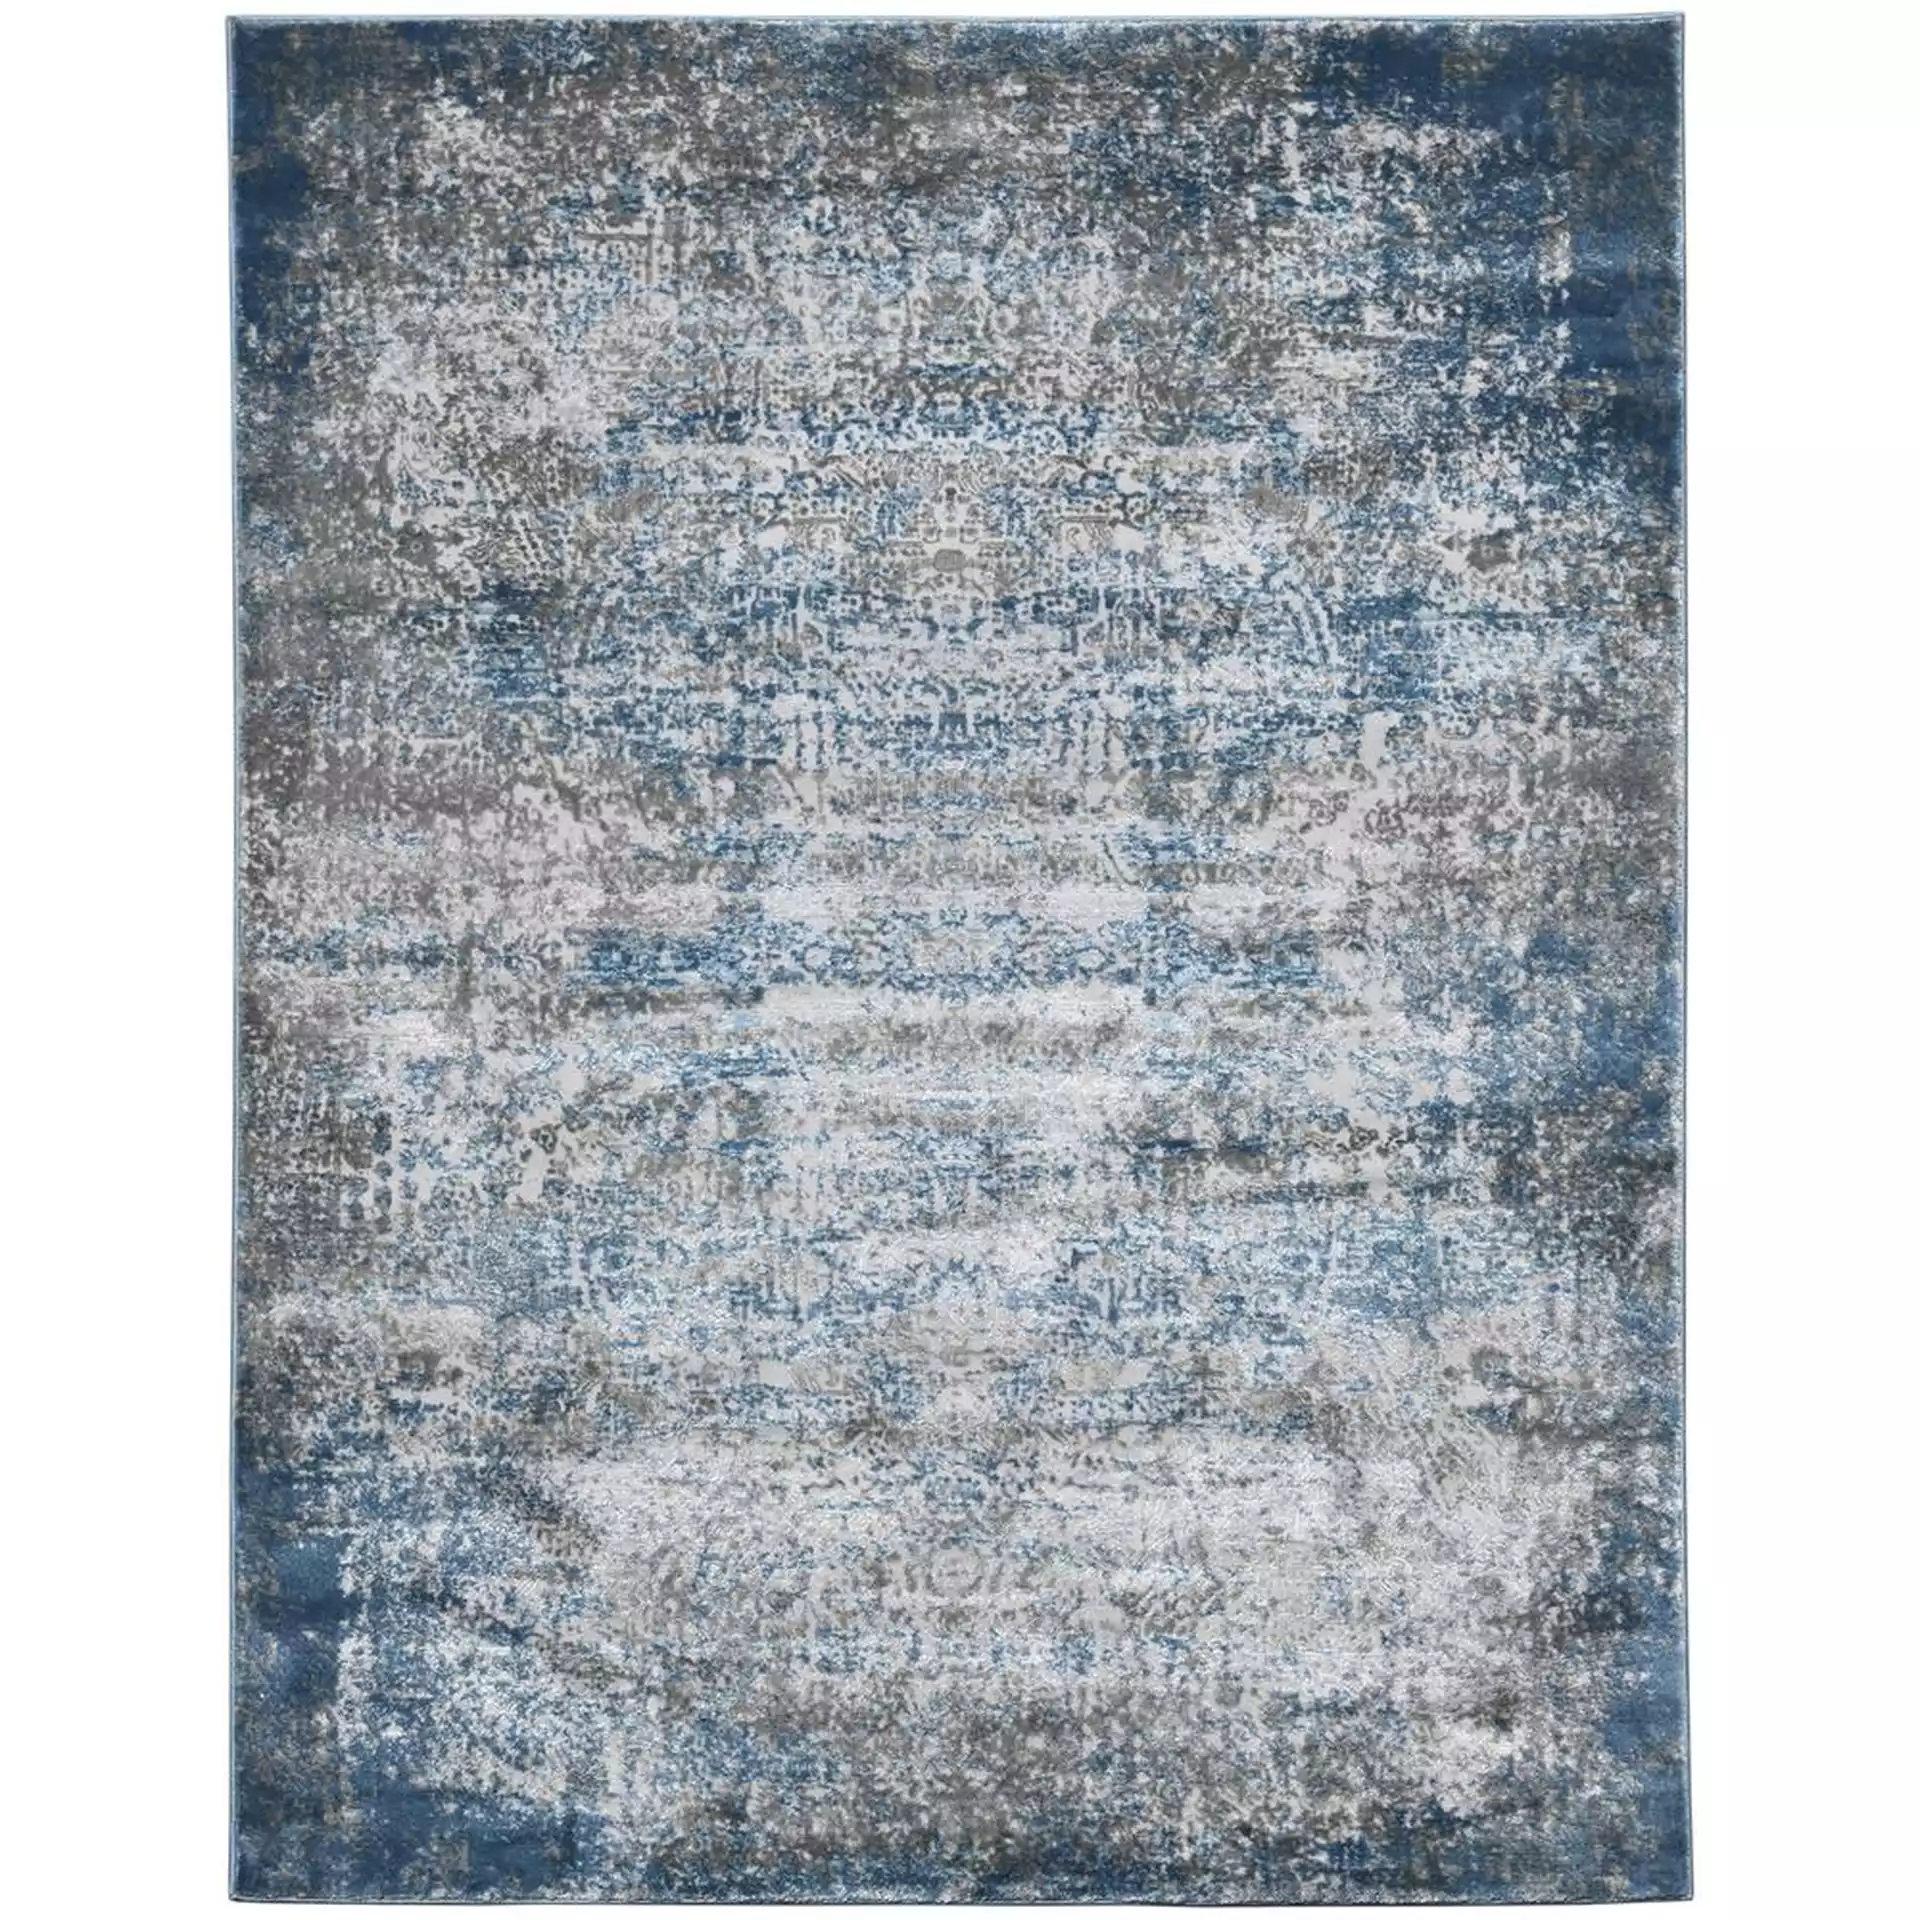 Amer Rugs Cairo Gray/Blue 5 ft. 3 in. x 7 ft. 9 in. Contemporary Abstract Area Rug